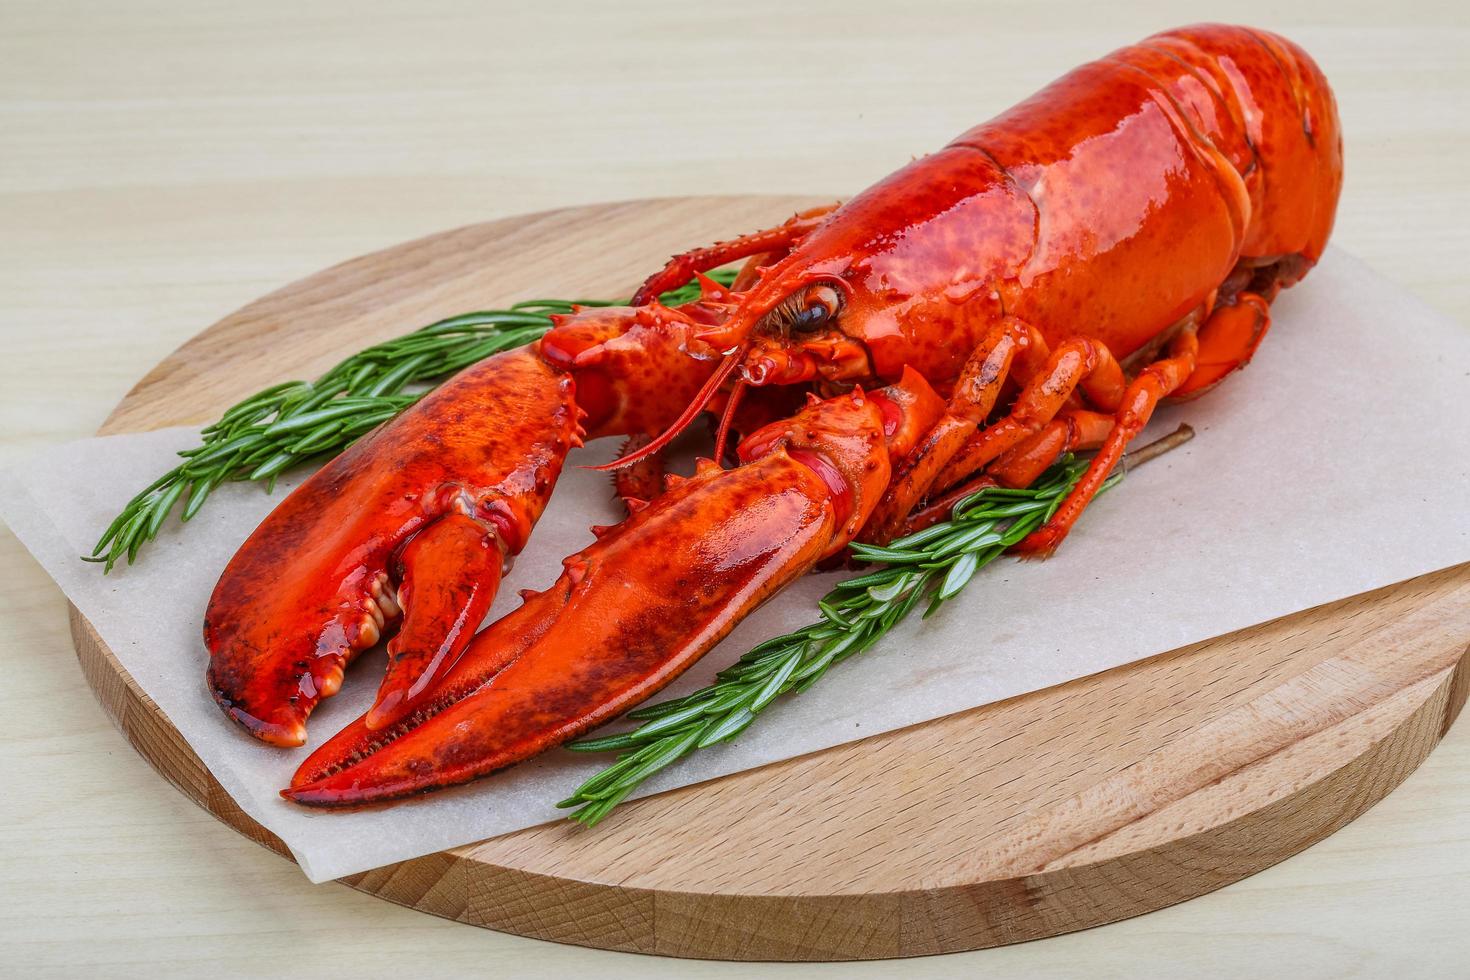 Lobster on wooden board and wooden background photo